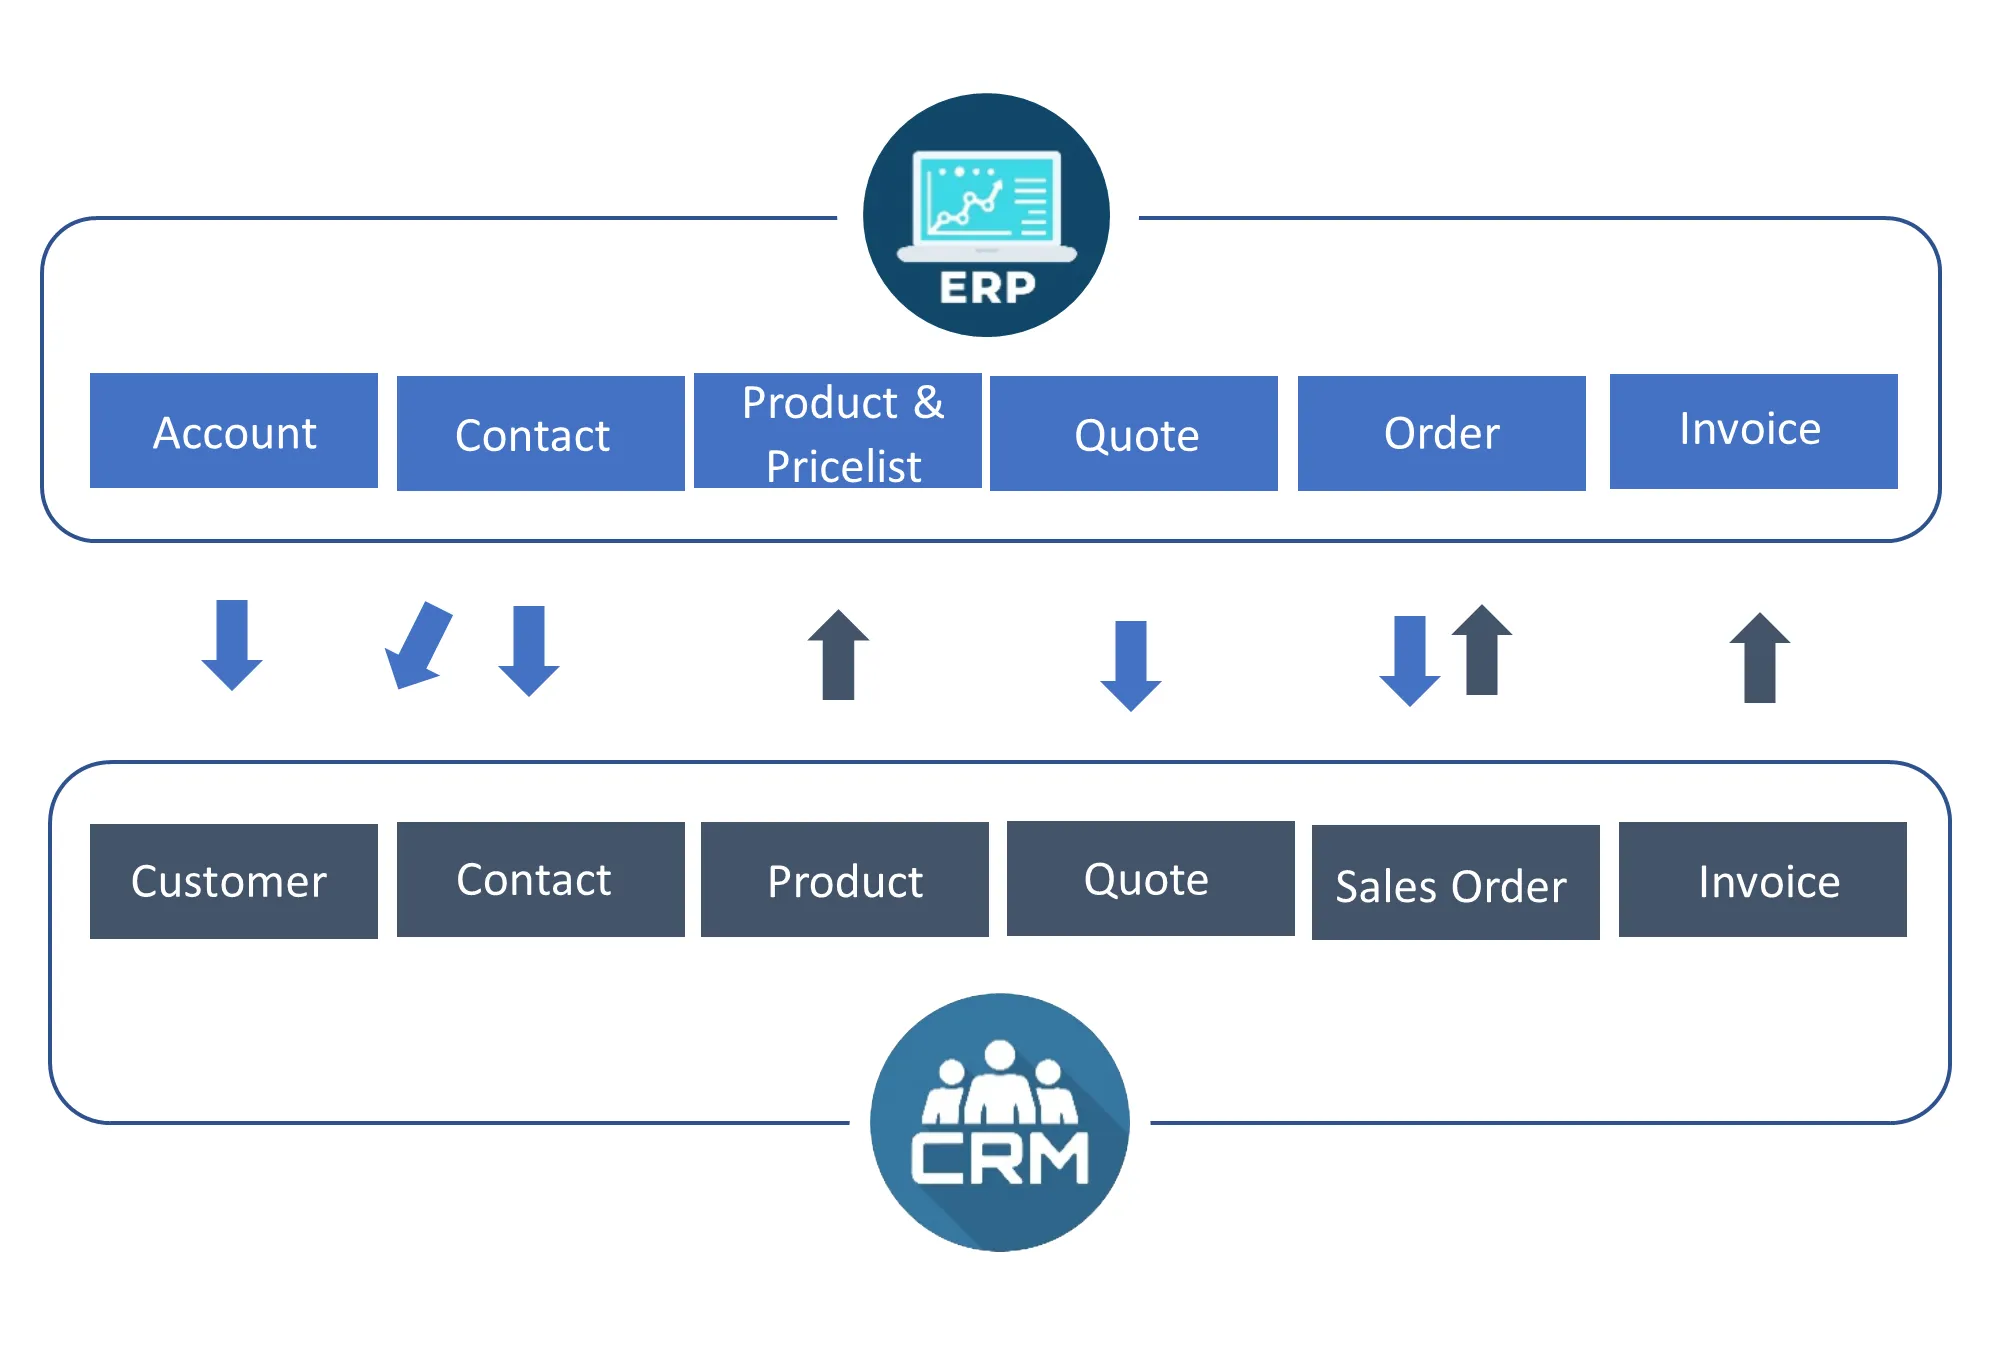 Integration of ERP and CRM Systems